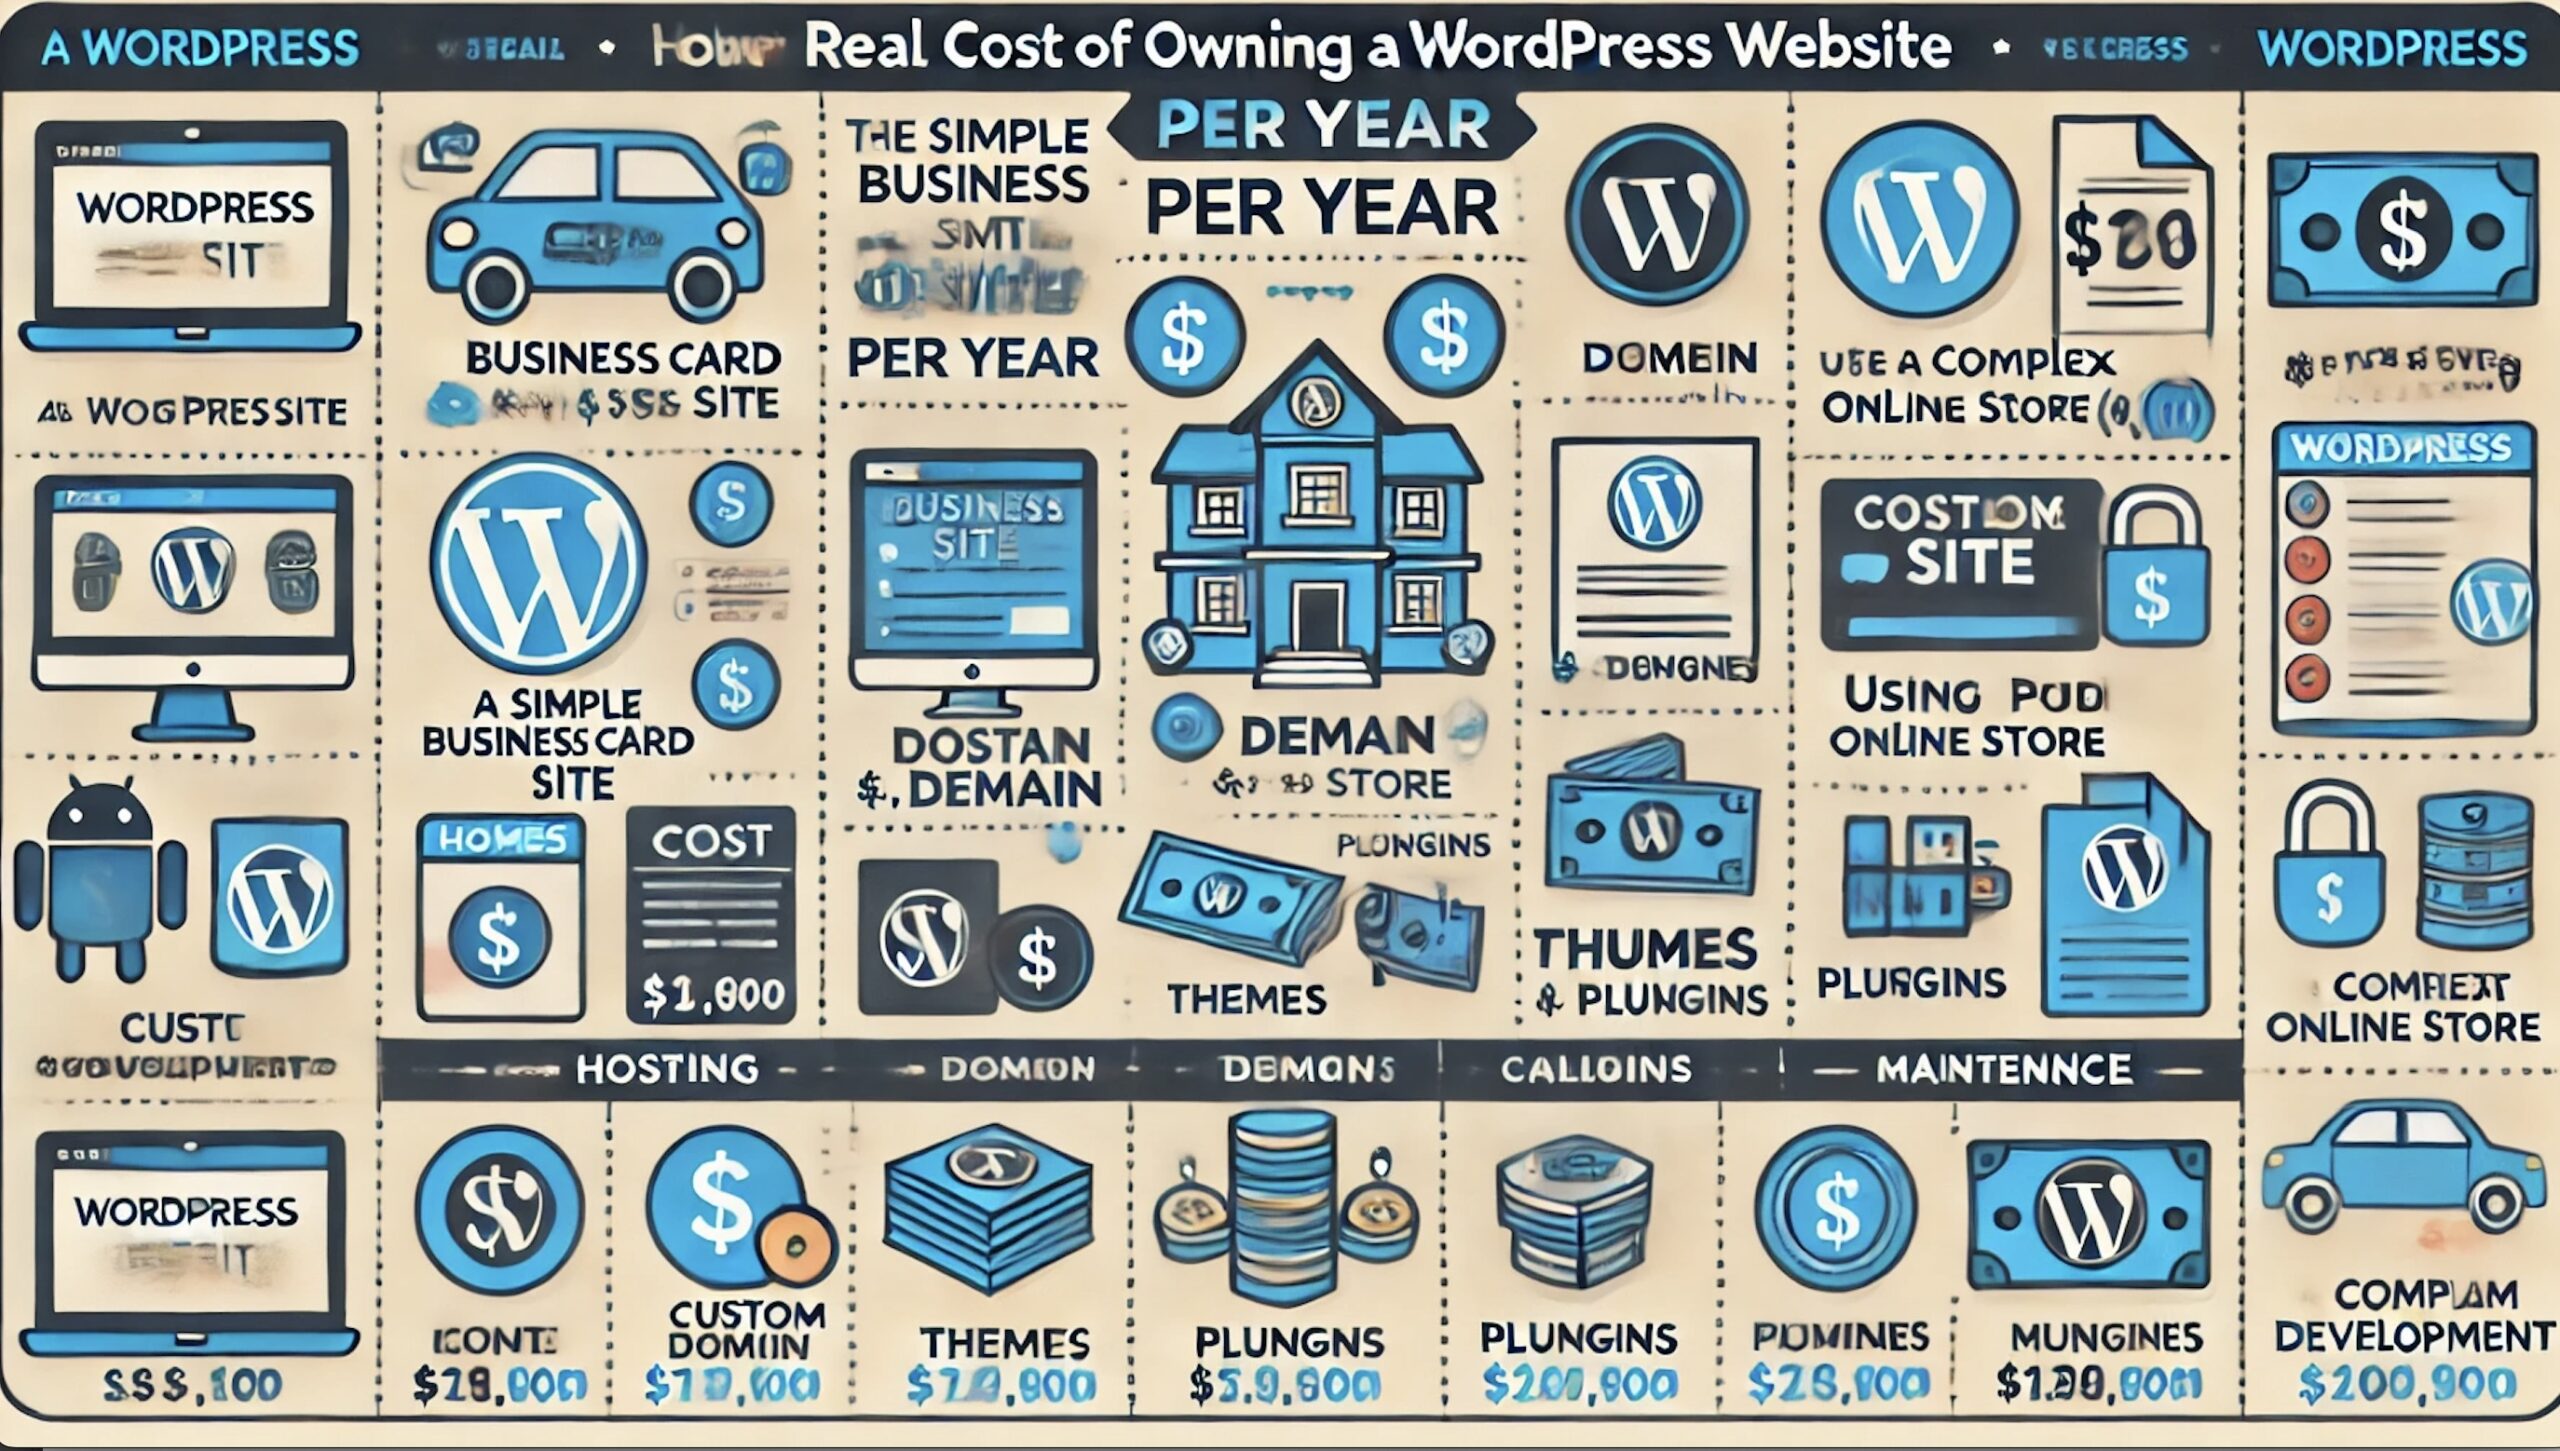 Real Cost of Owning a WordPress Website Per Year